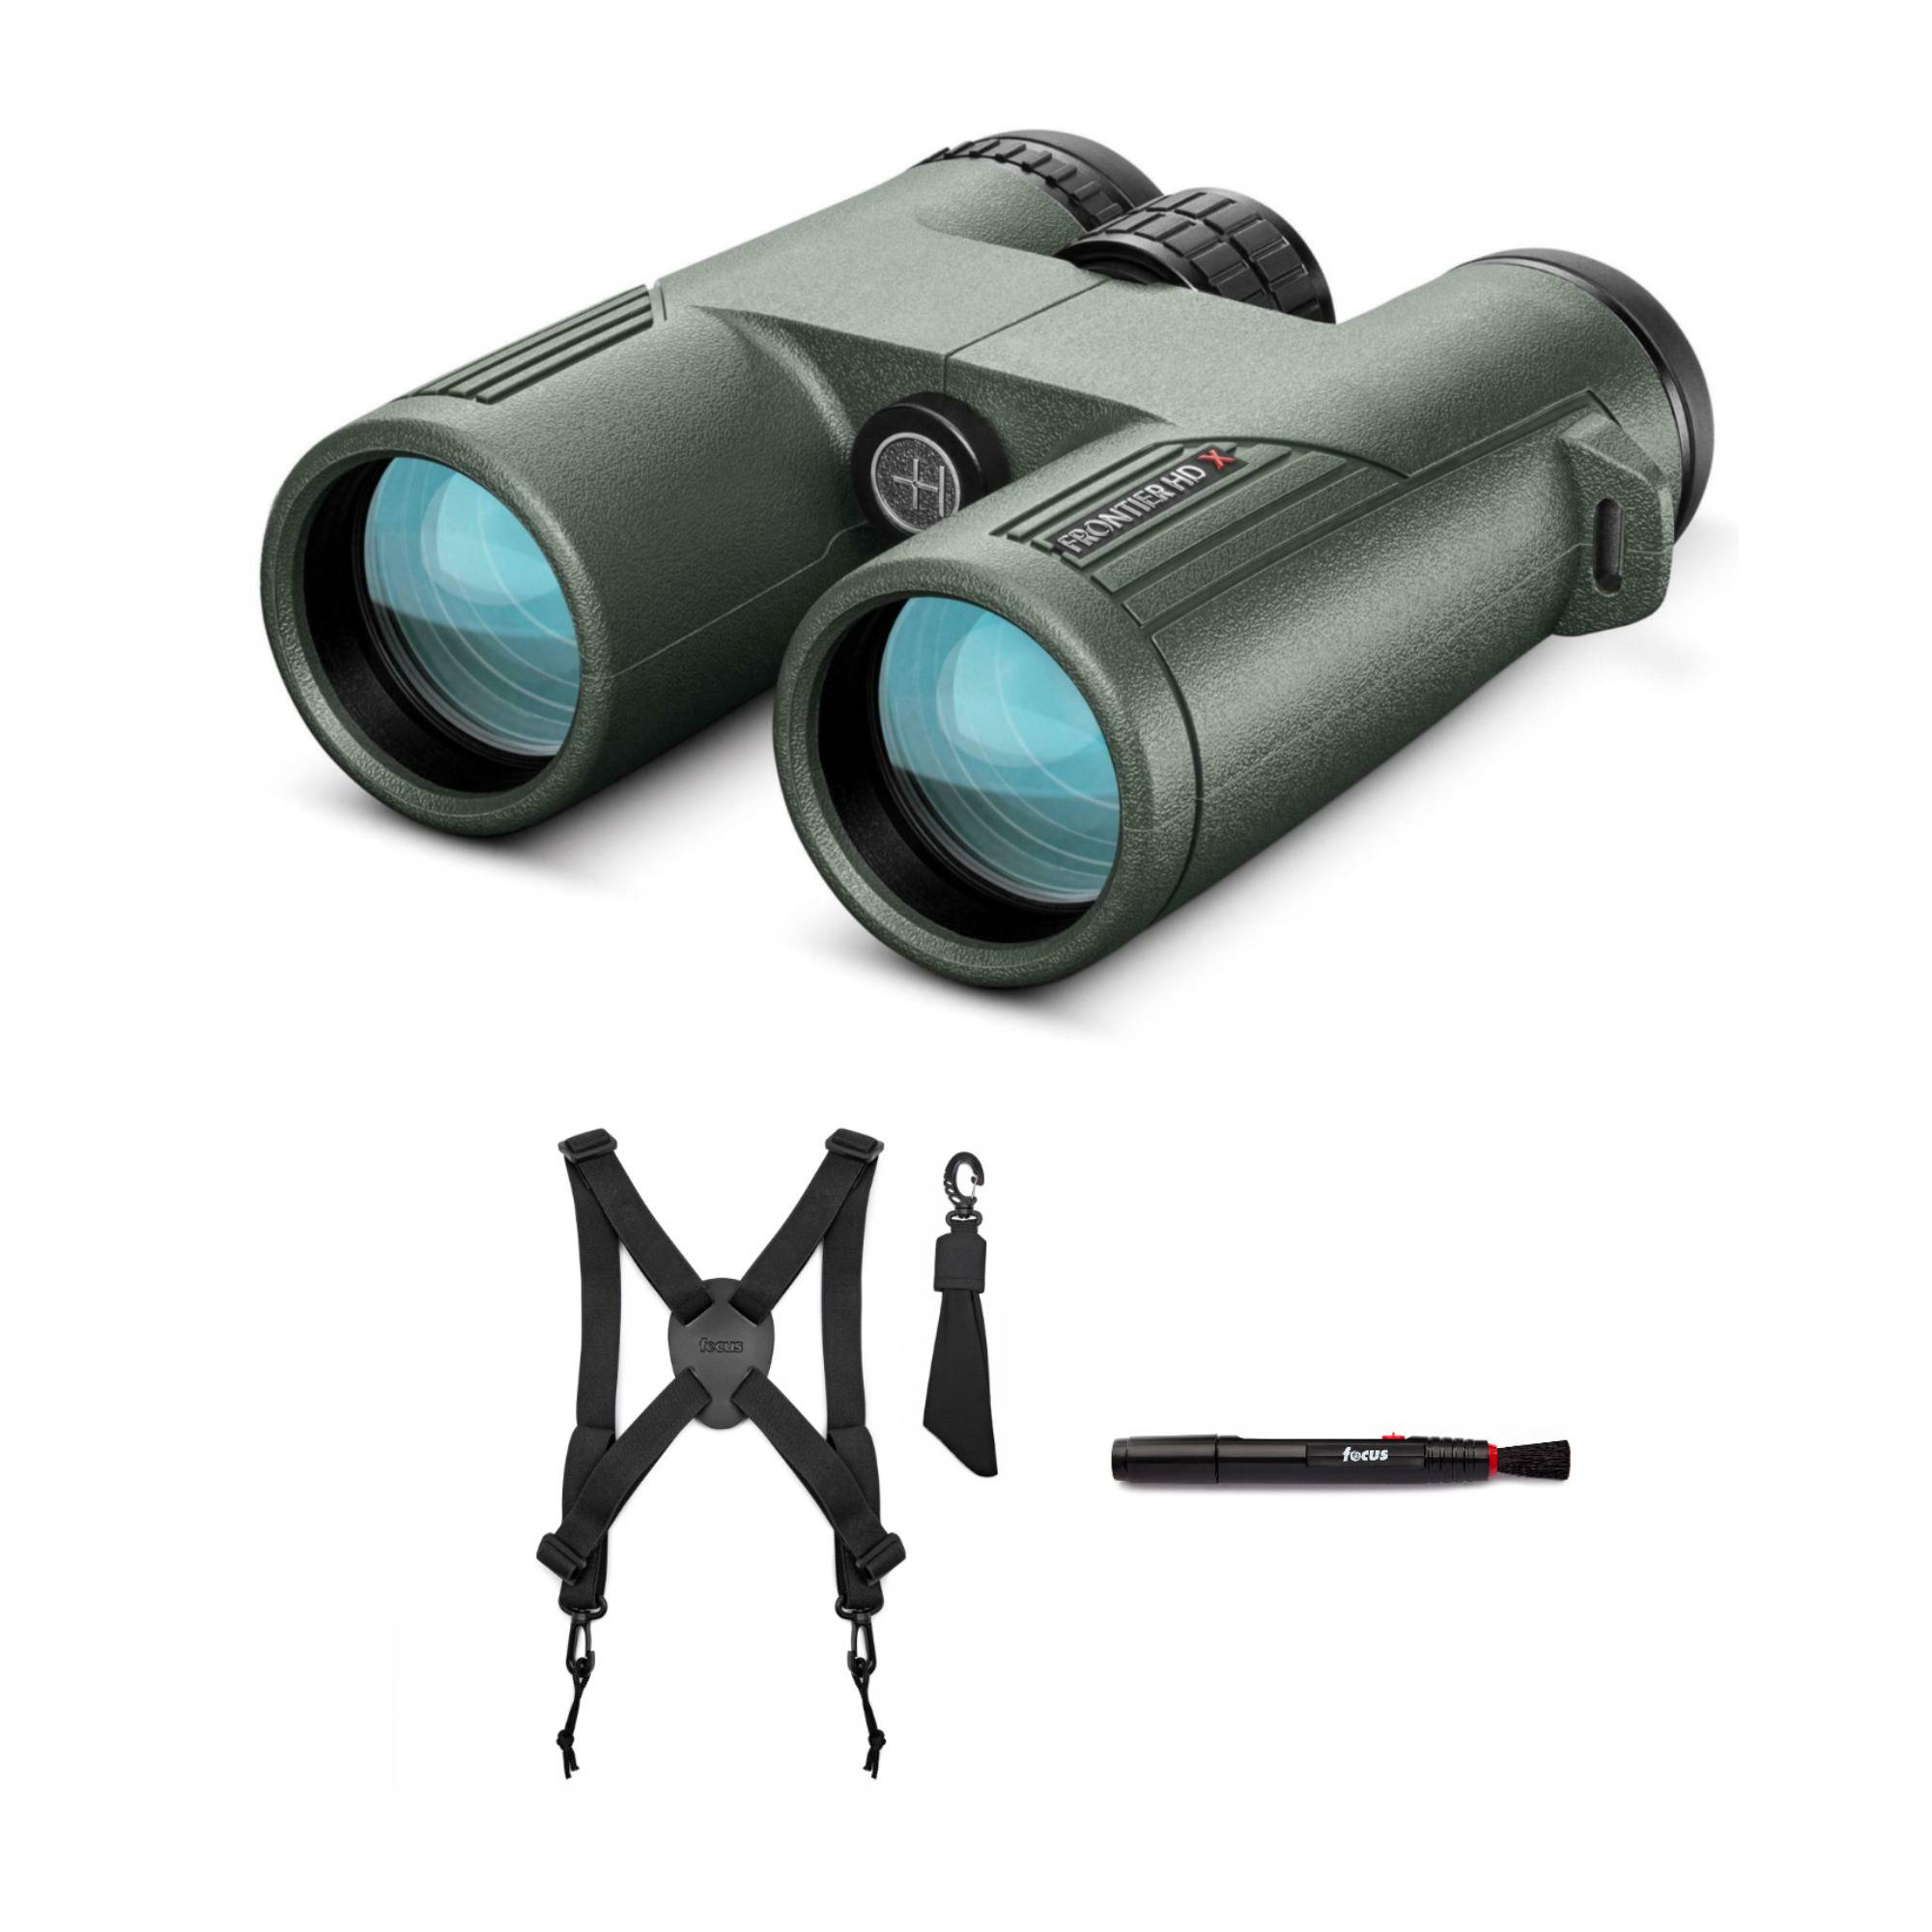 Hawke Sport Optics Frontier HD X 10x42 Binoculars (Green) with Lens Cleaning Pen and Harness